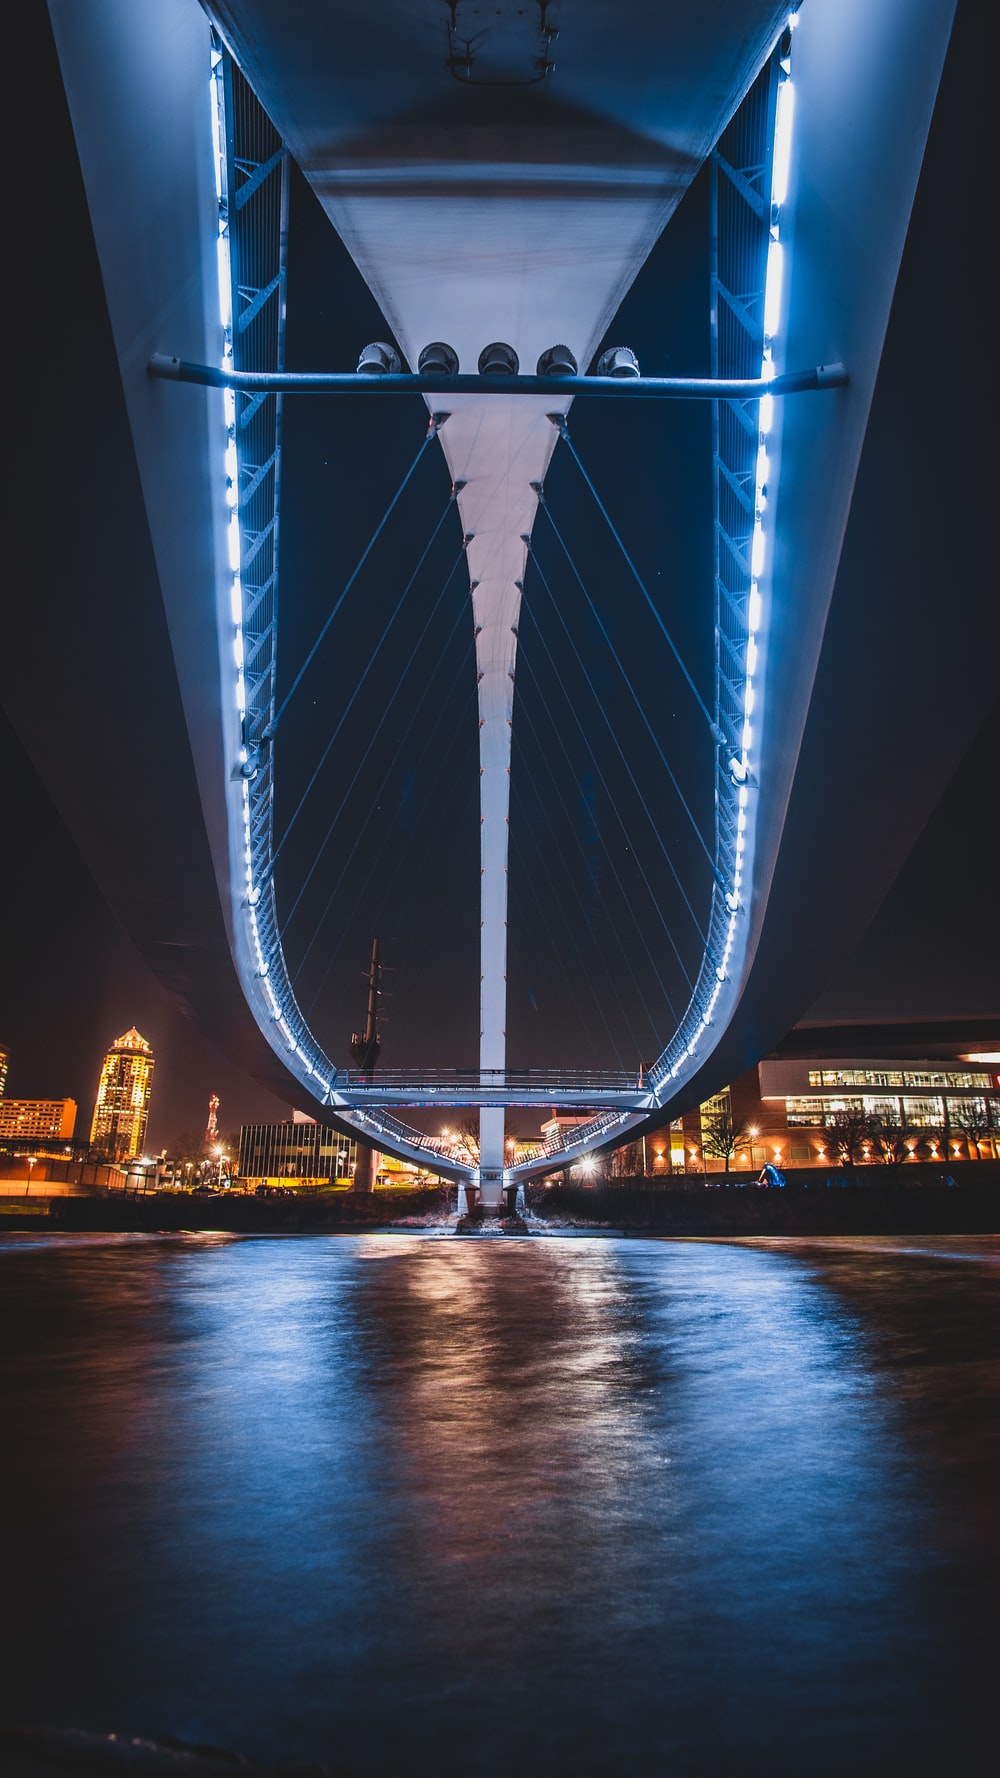 Blue Bridge Over Body Of Water During Night Time Photo Des